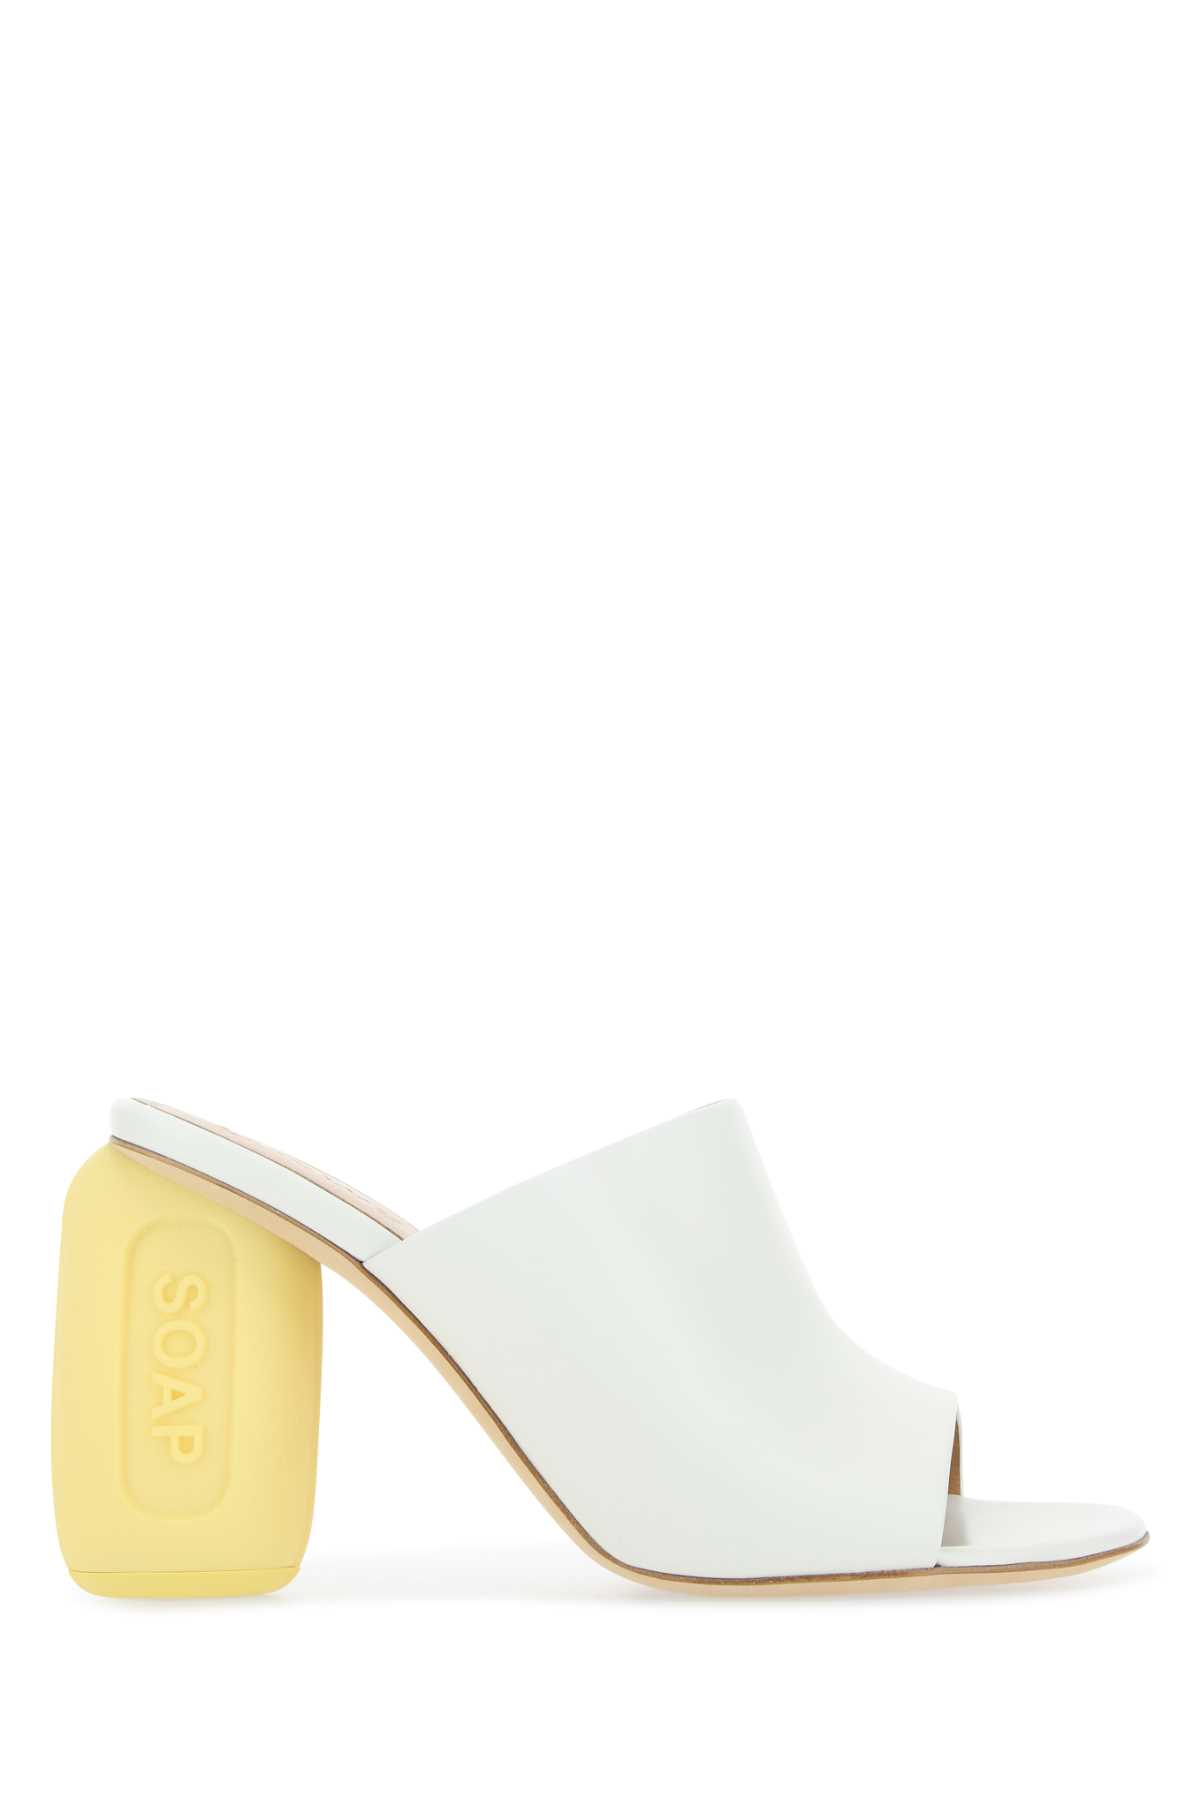 Shop Loewe Ivory Leather Soap Mules In Whiteyellow